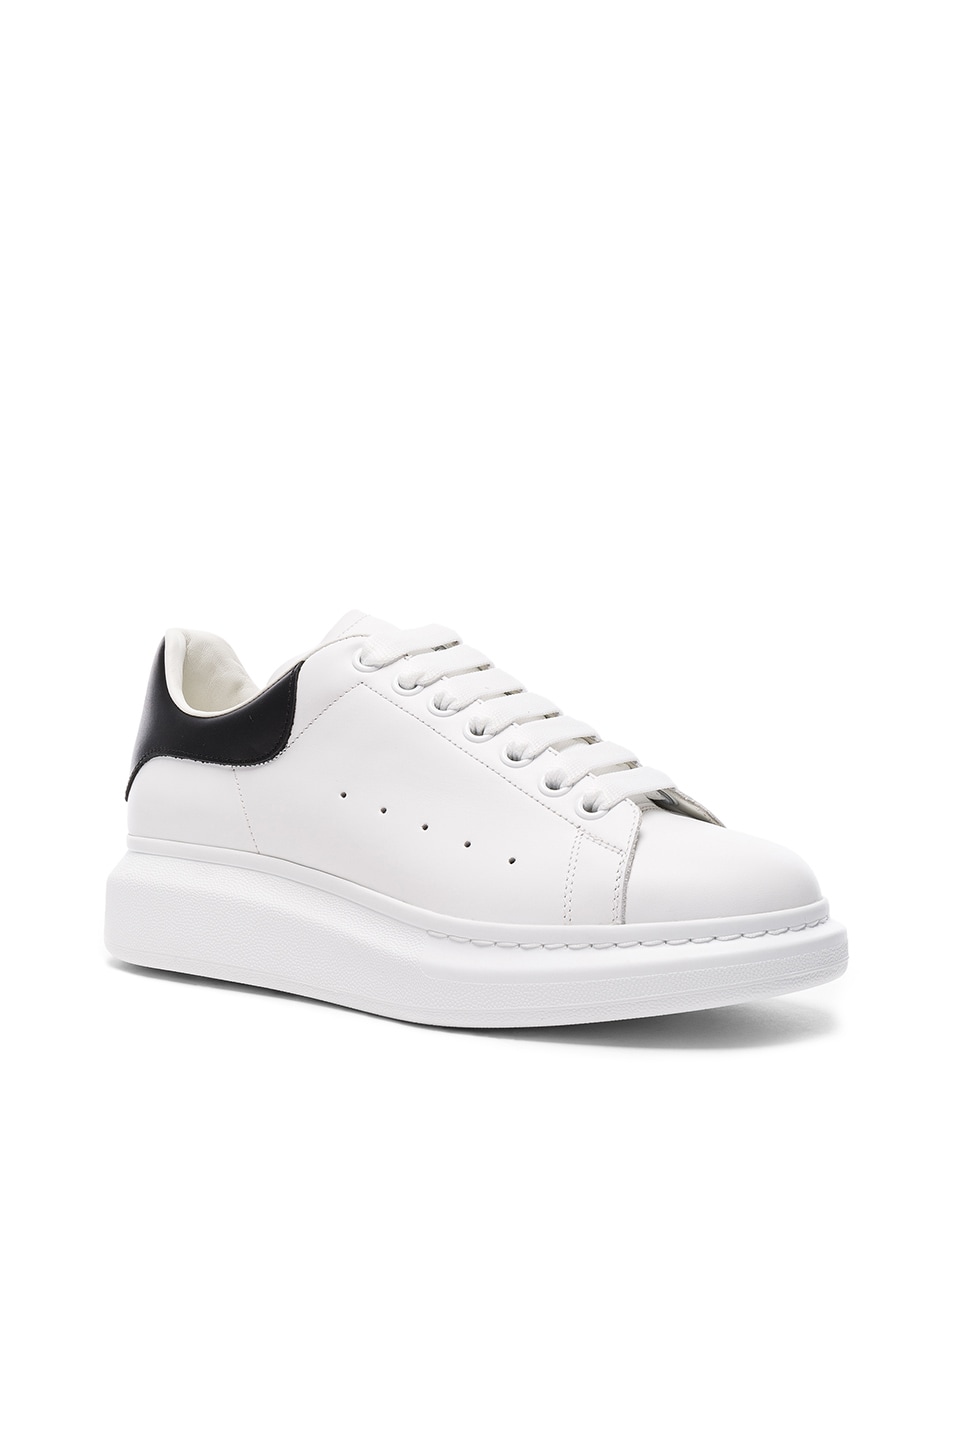 Image 1 of Alexander McQueen Croc Embossed Leather Sneakers in White